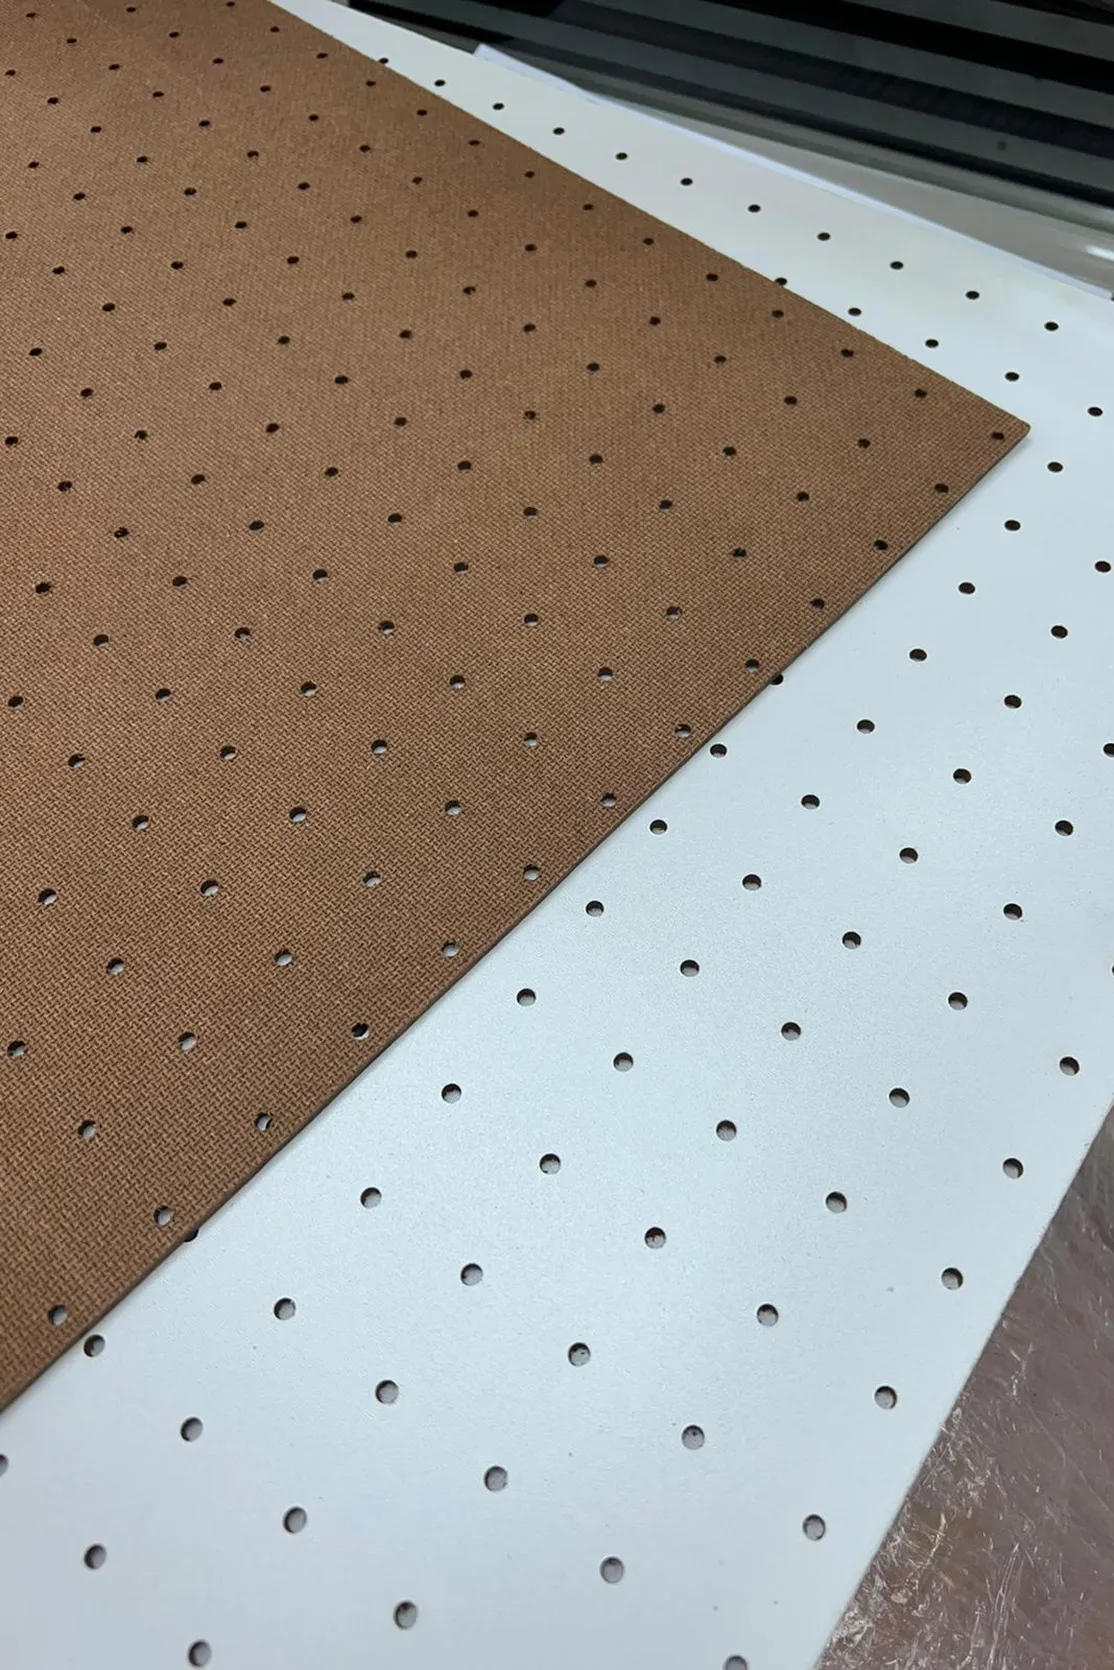 Brown and white pegboard on a manufacturing table